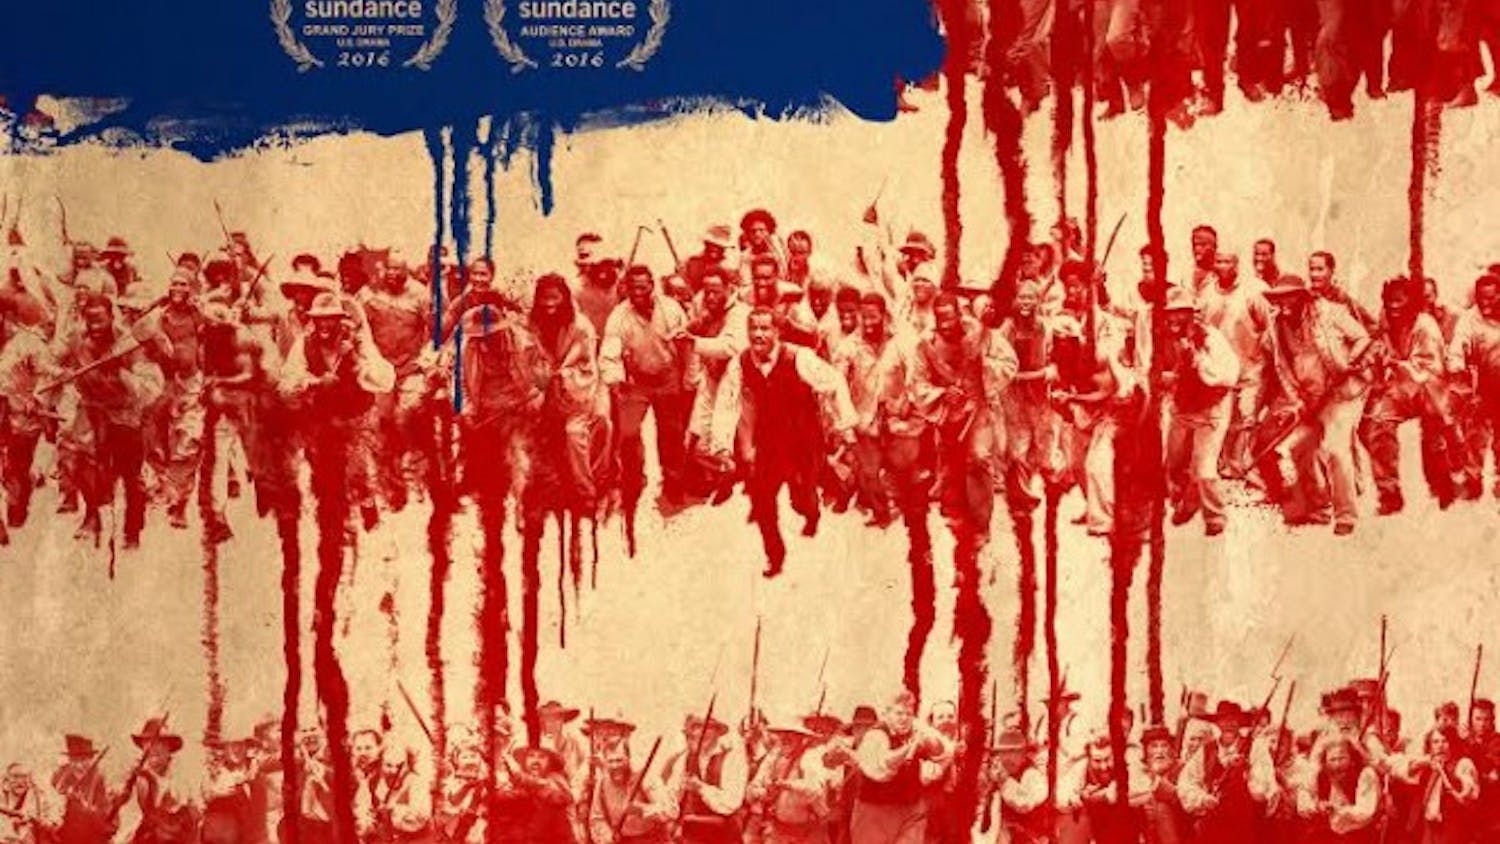 "The Birth of a Nation" chronicles the Nat Turner rebellion in 1831.&nbsp;